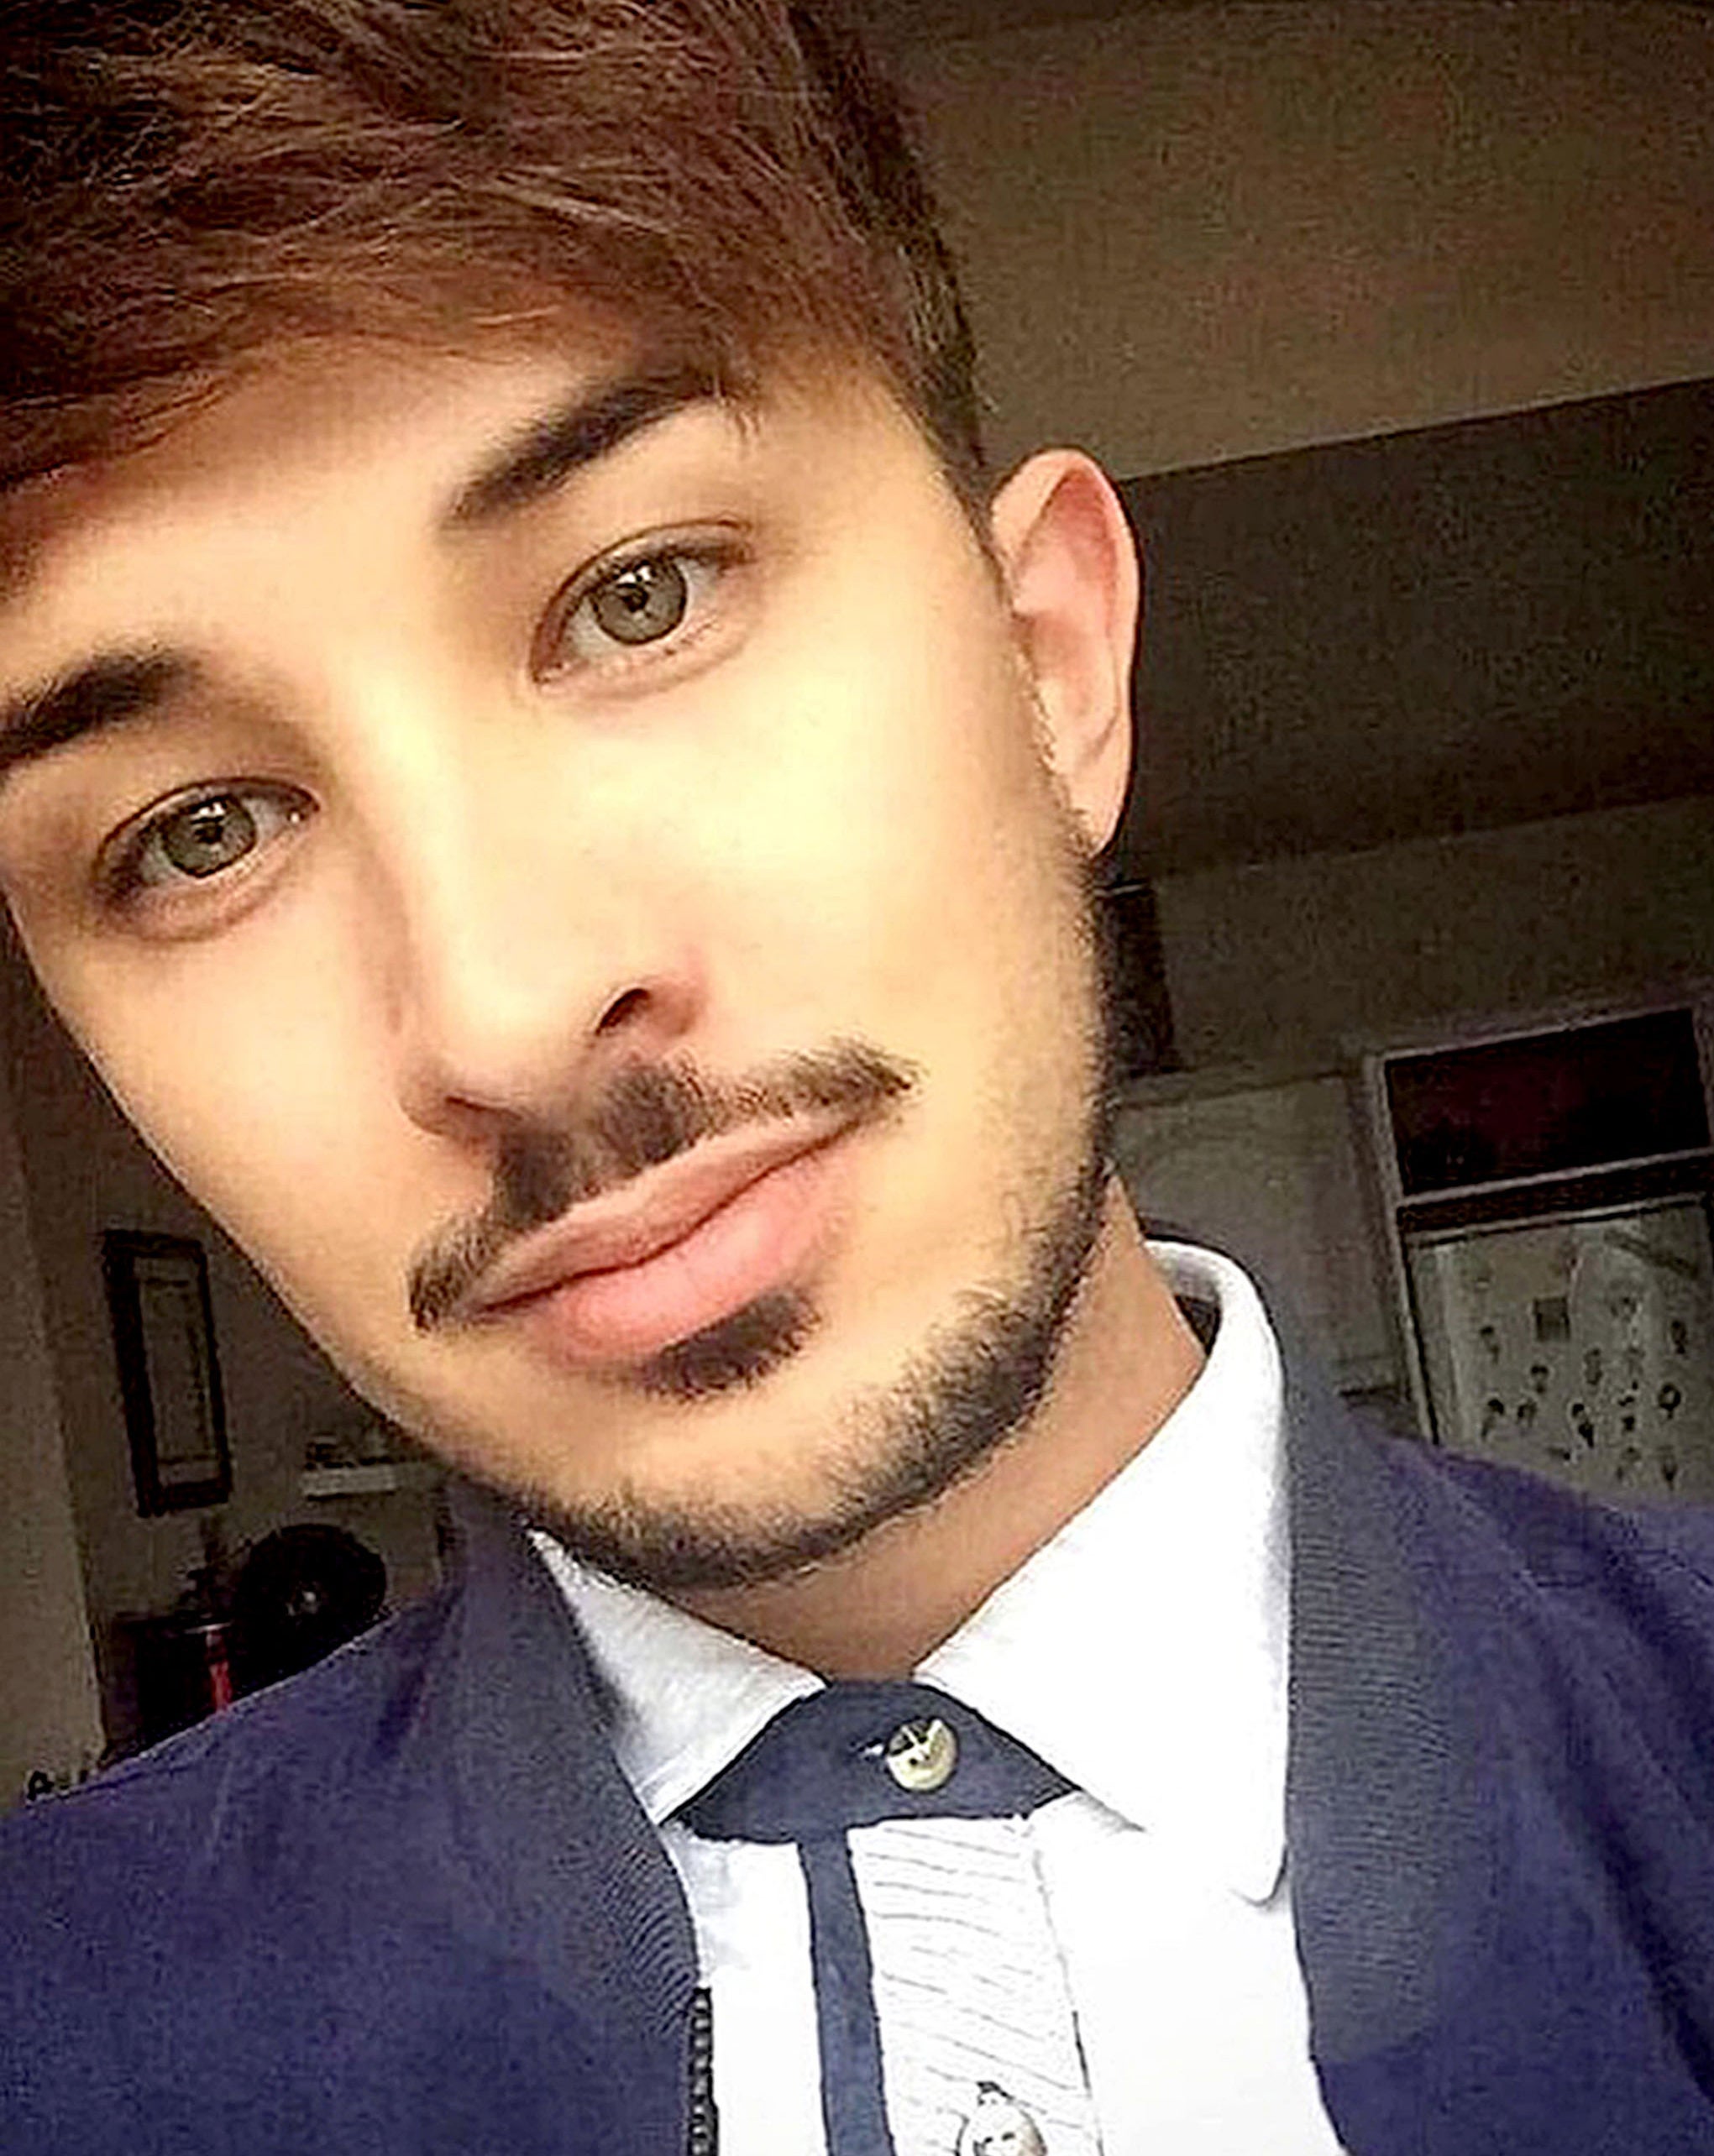 Martyn Hett, from Stockport, was among the 22 killed in the Manchester Arena terror attack (Greater Manchester Police/PA)